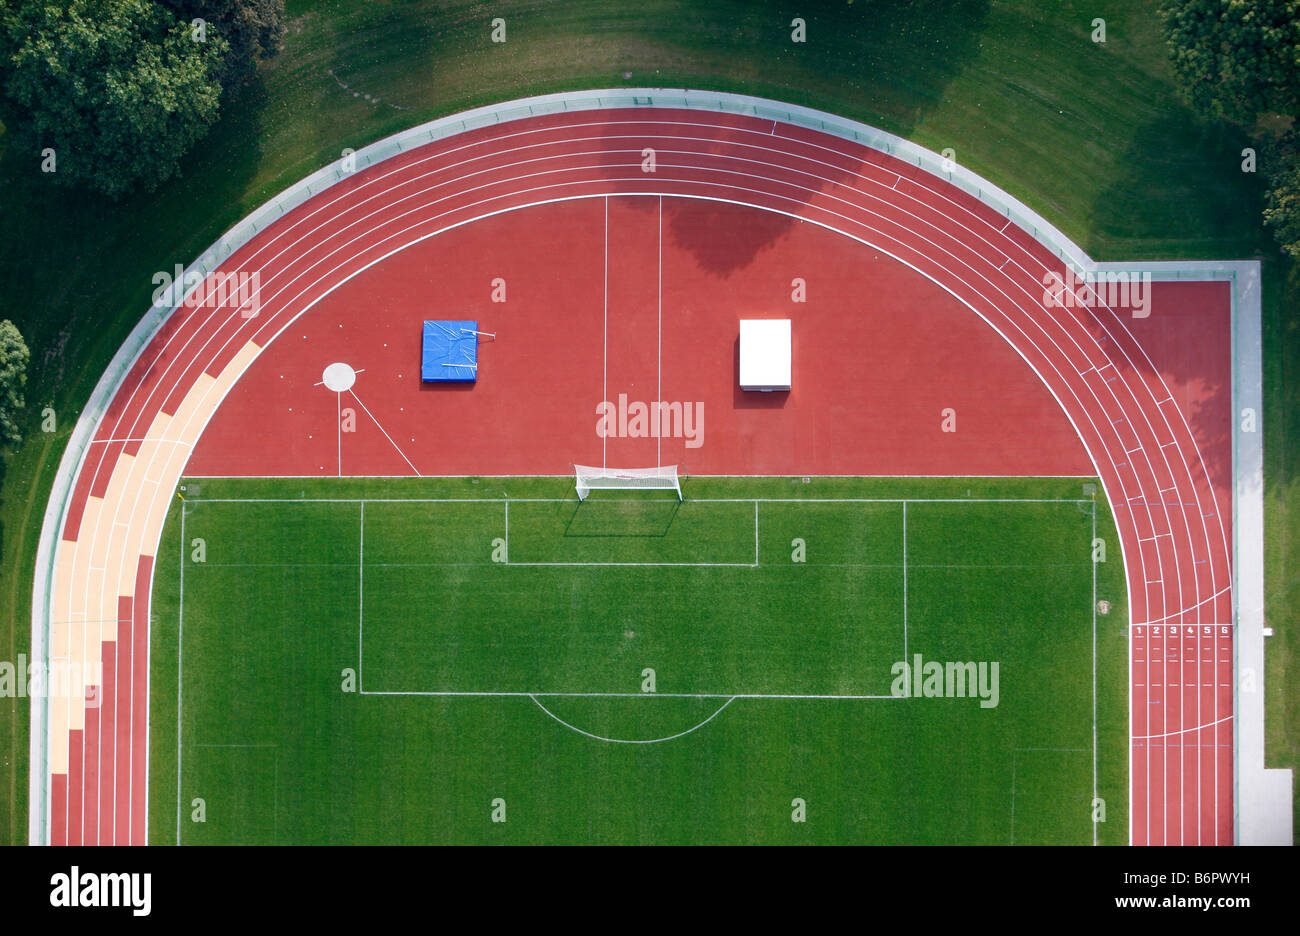 Sports ground, Muenster, Germany Stock Photo